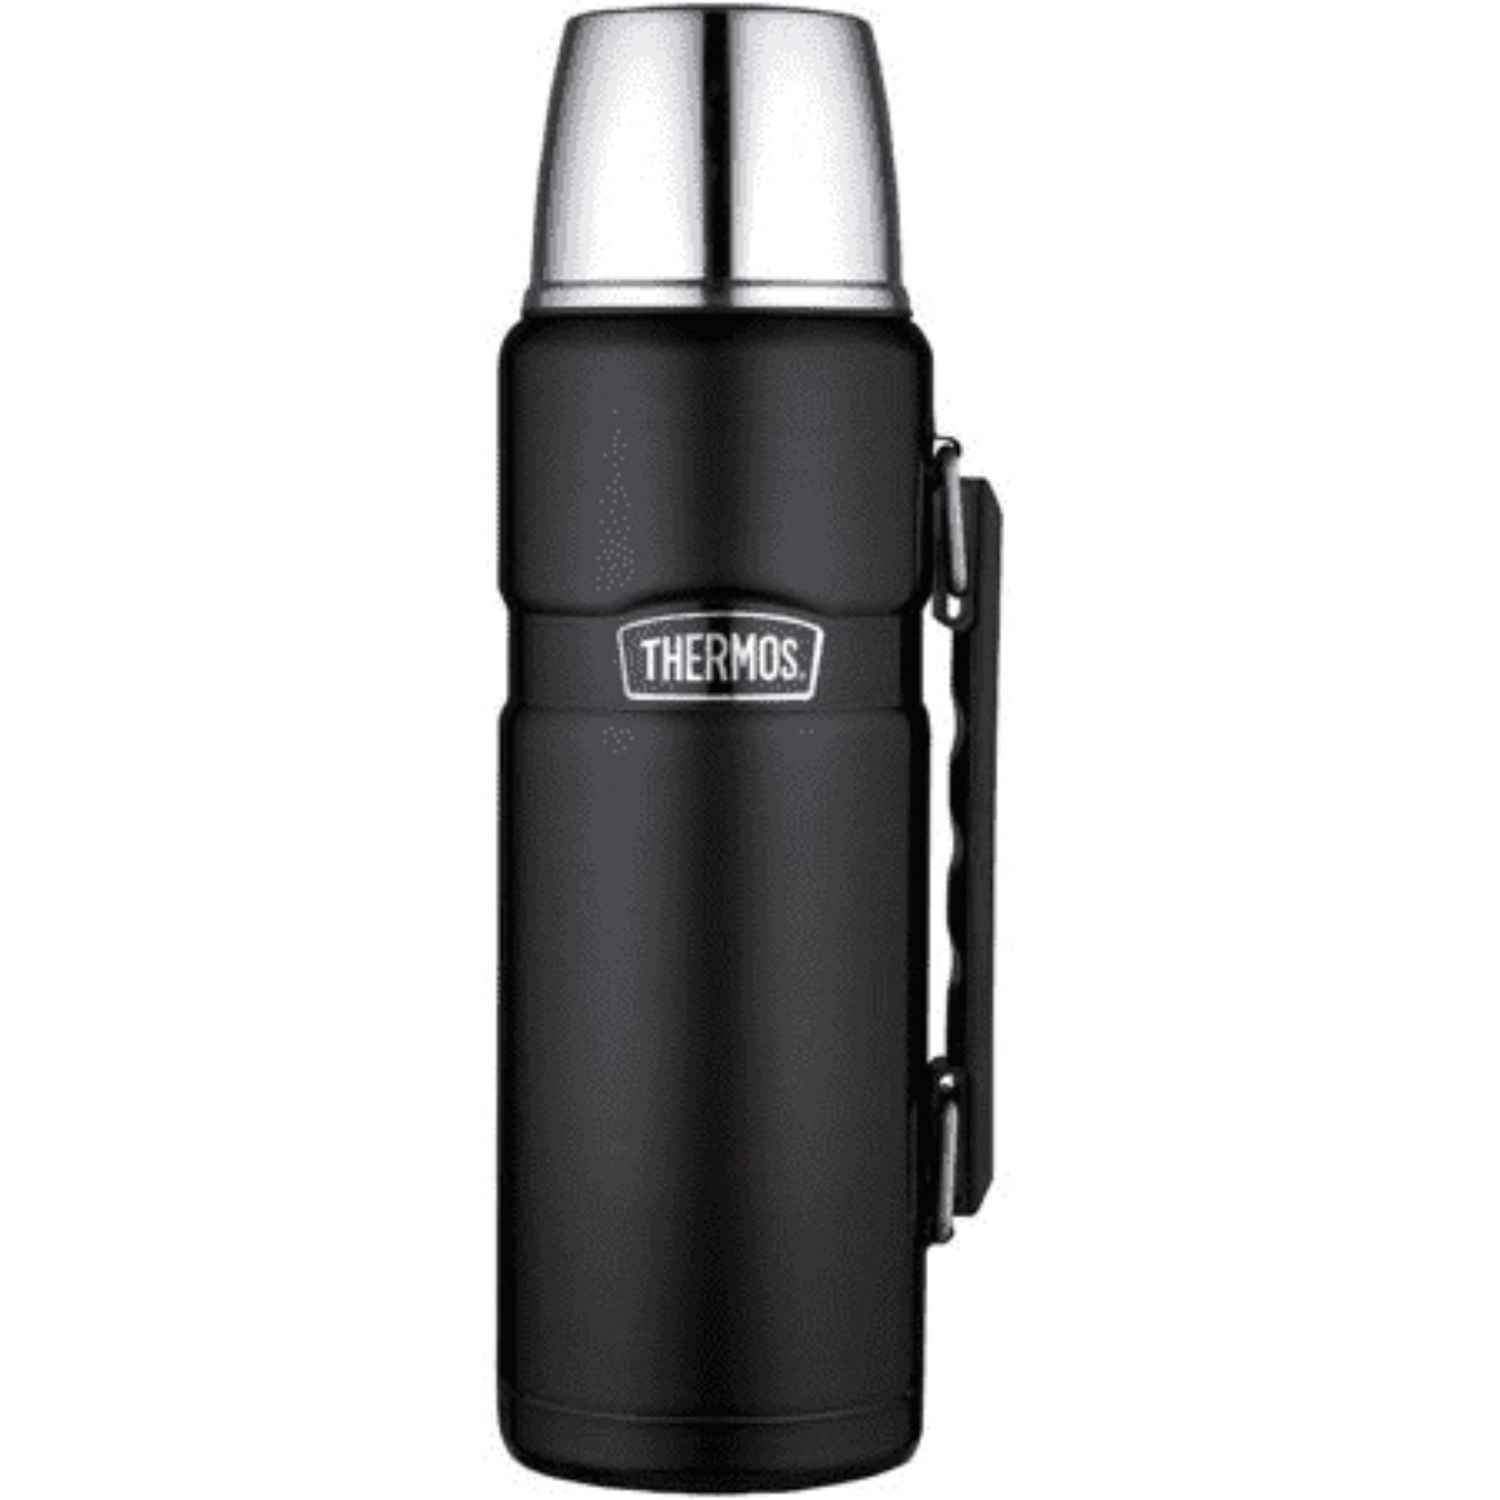 Thermos 40 oz Stainless Steel Beverage 